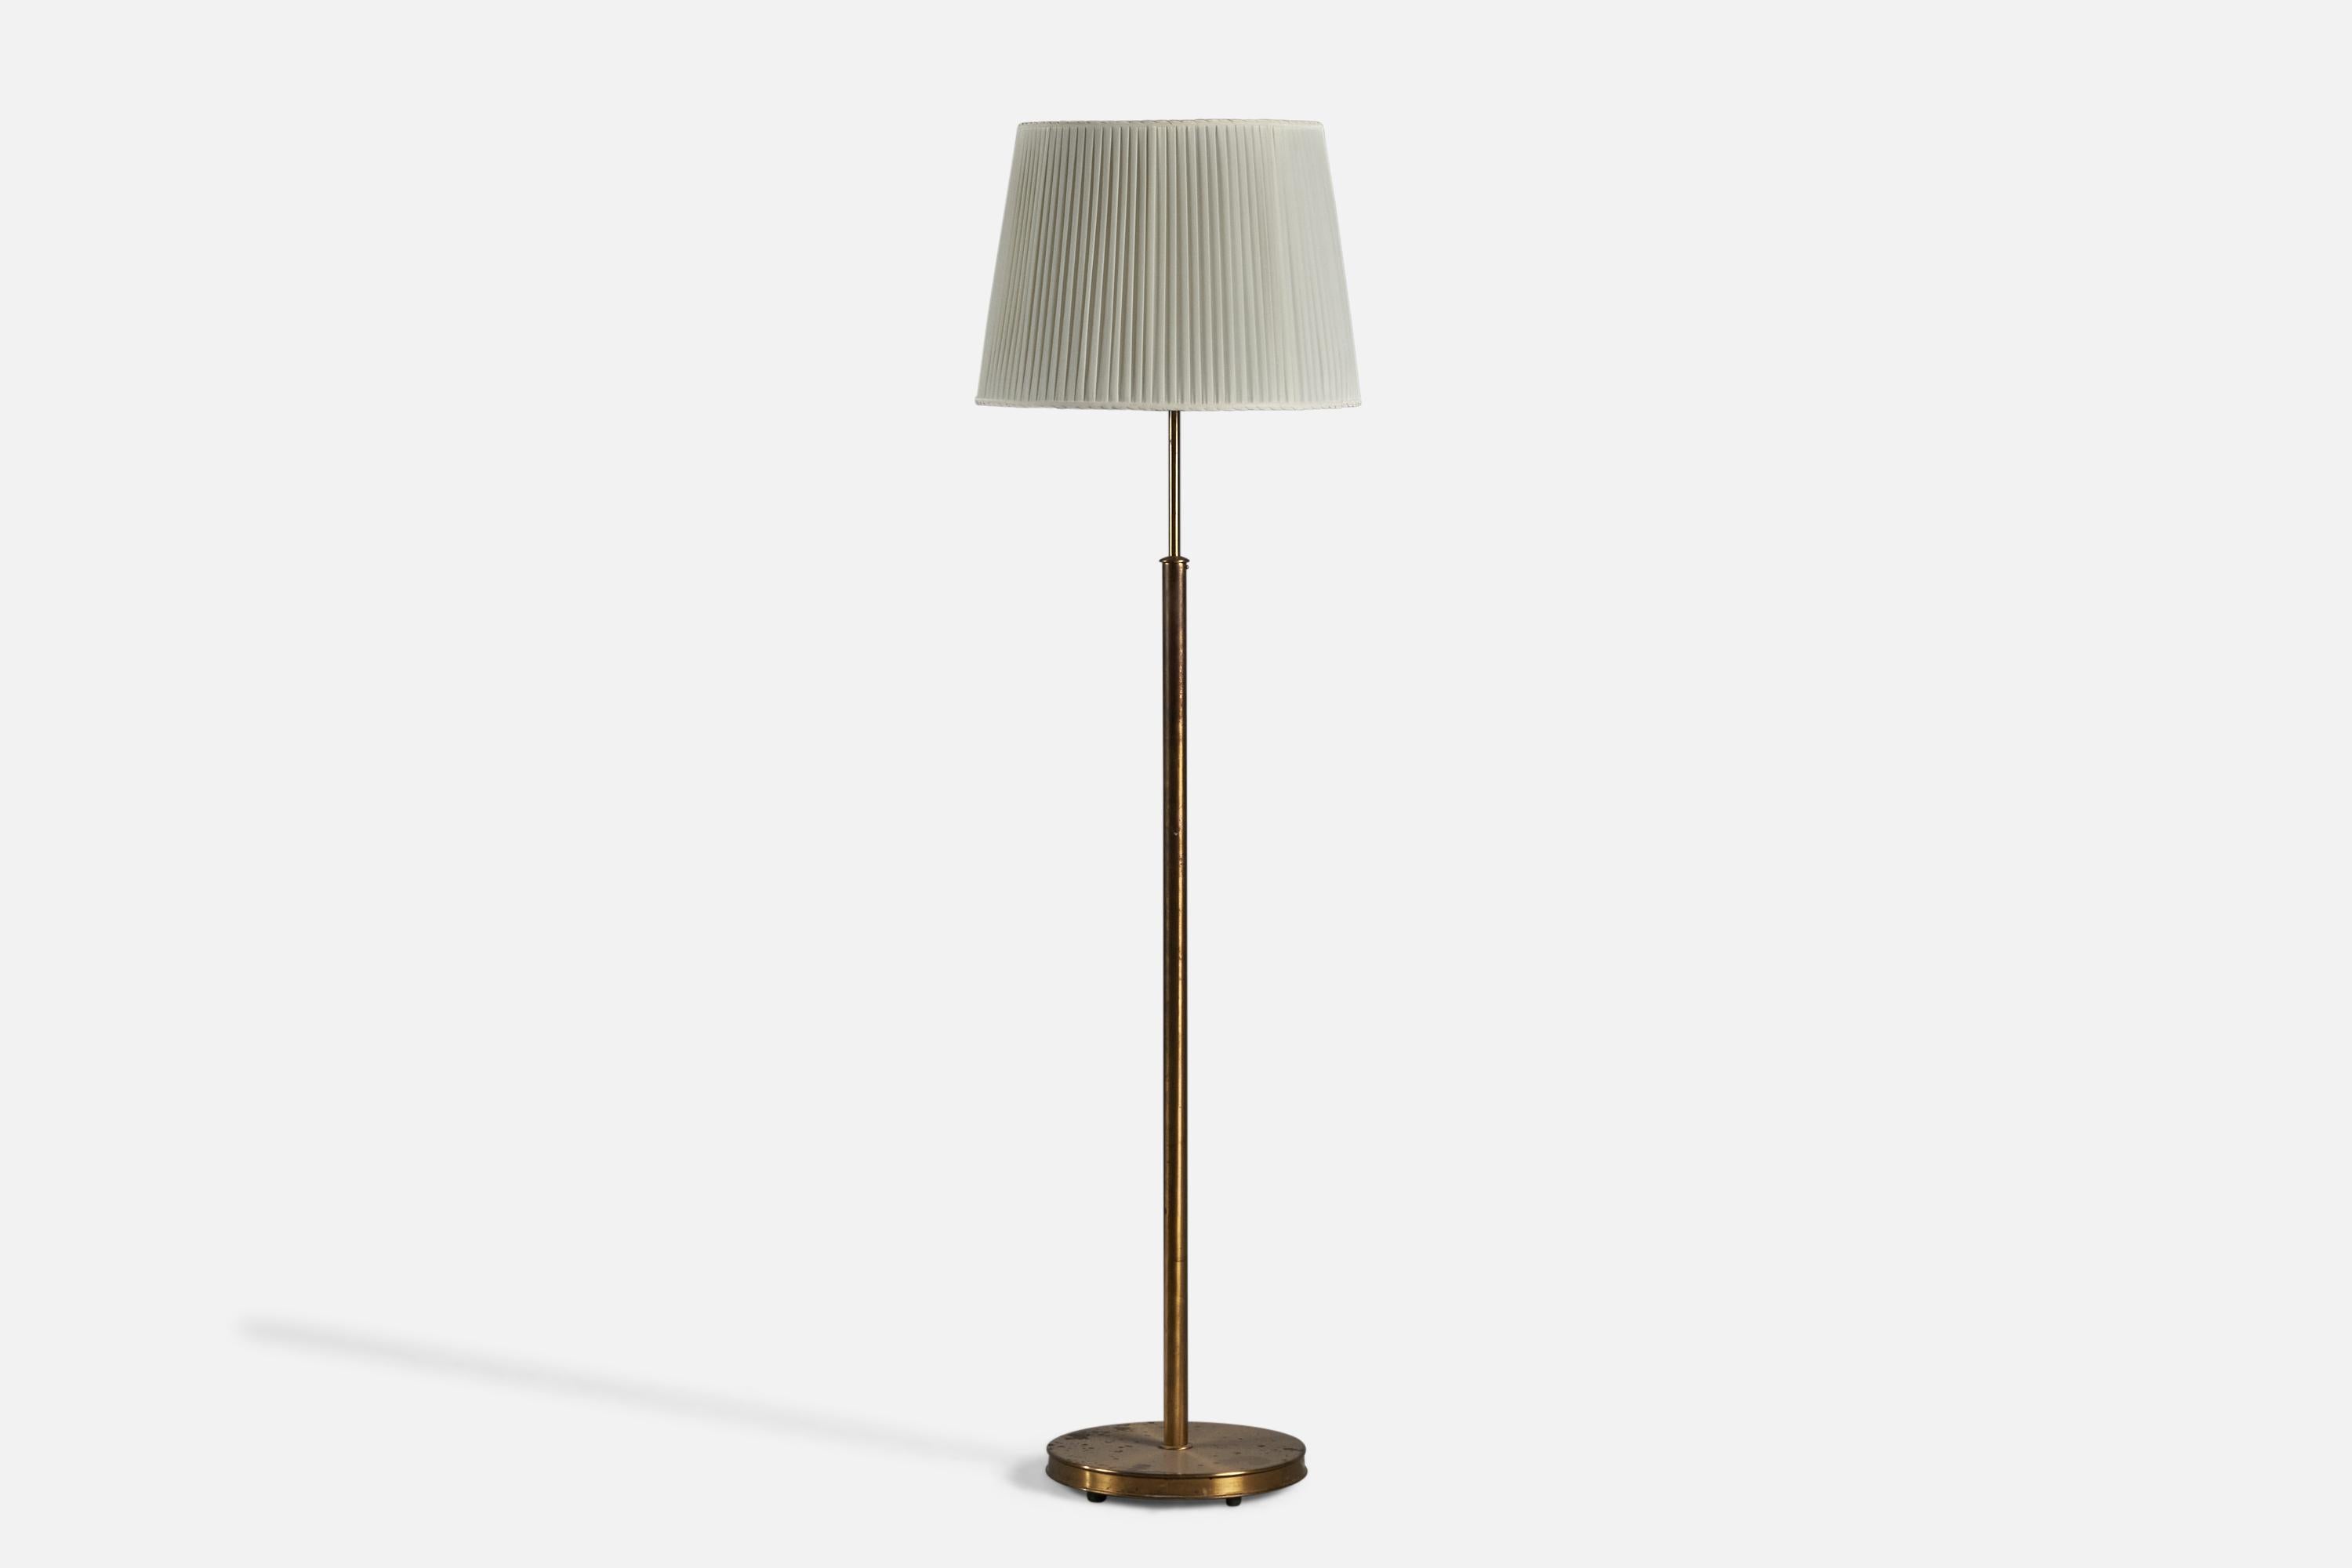 A brass and fabric floor lamp designed by Josef Frank and produced by Svenskt Tenn, Sweden, 1940s.

Overall Dimensions (inches): 61” H x 17” Diameter
Bulb Specifications: E-26 Bulb
Number of Sockets: 4
Original lampshade in fair condition, minor